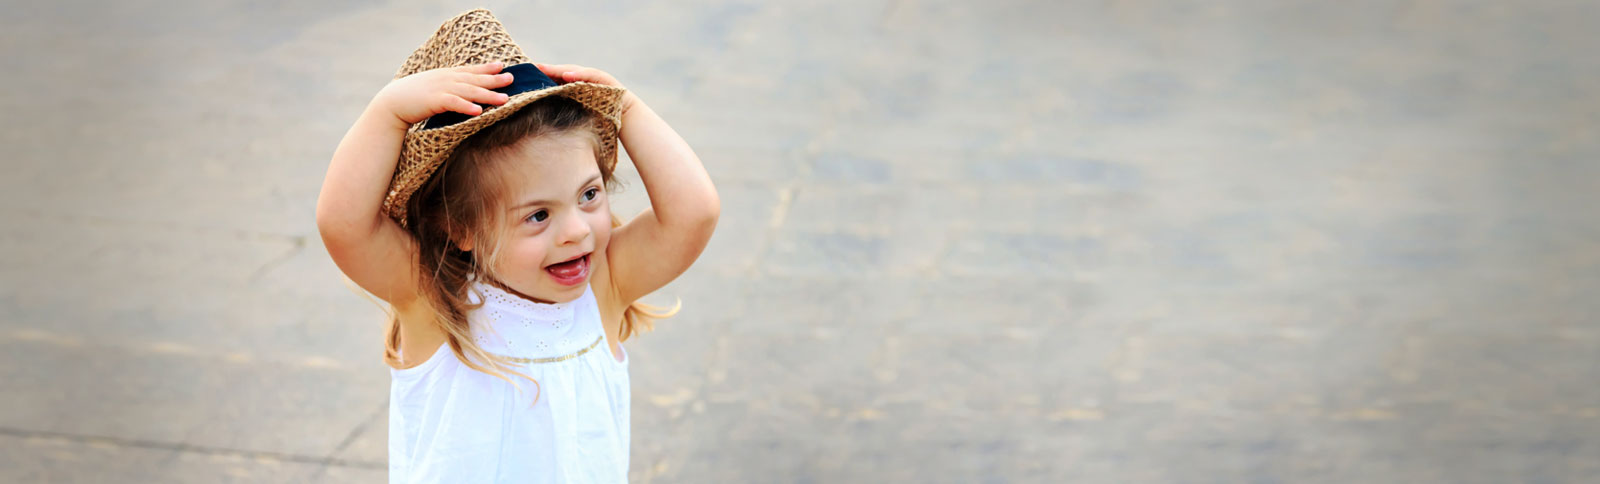 Happy, young girl with Down Syndrome, wearing a white Summery dress and grabbing her brown straw hat